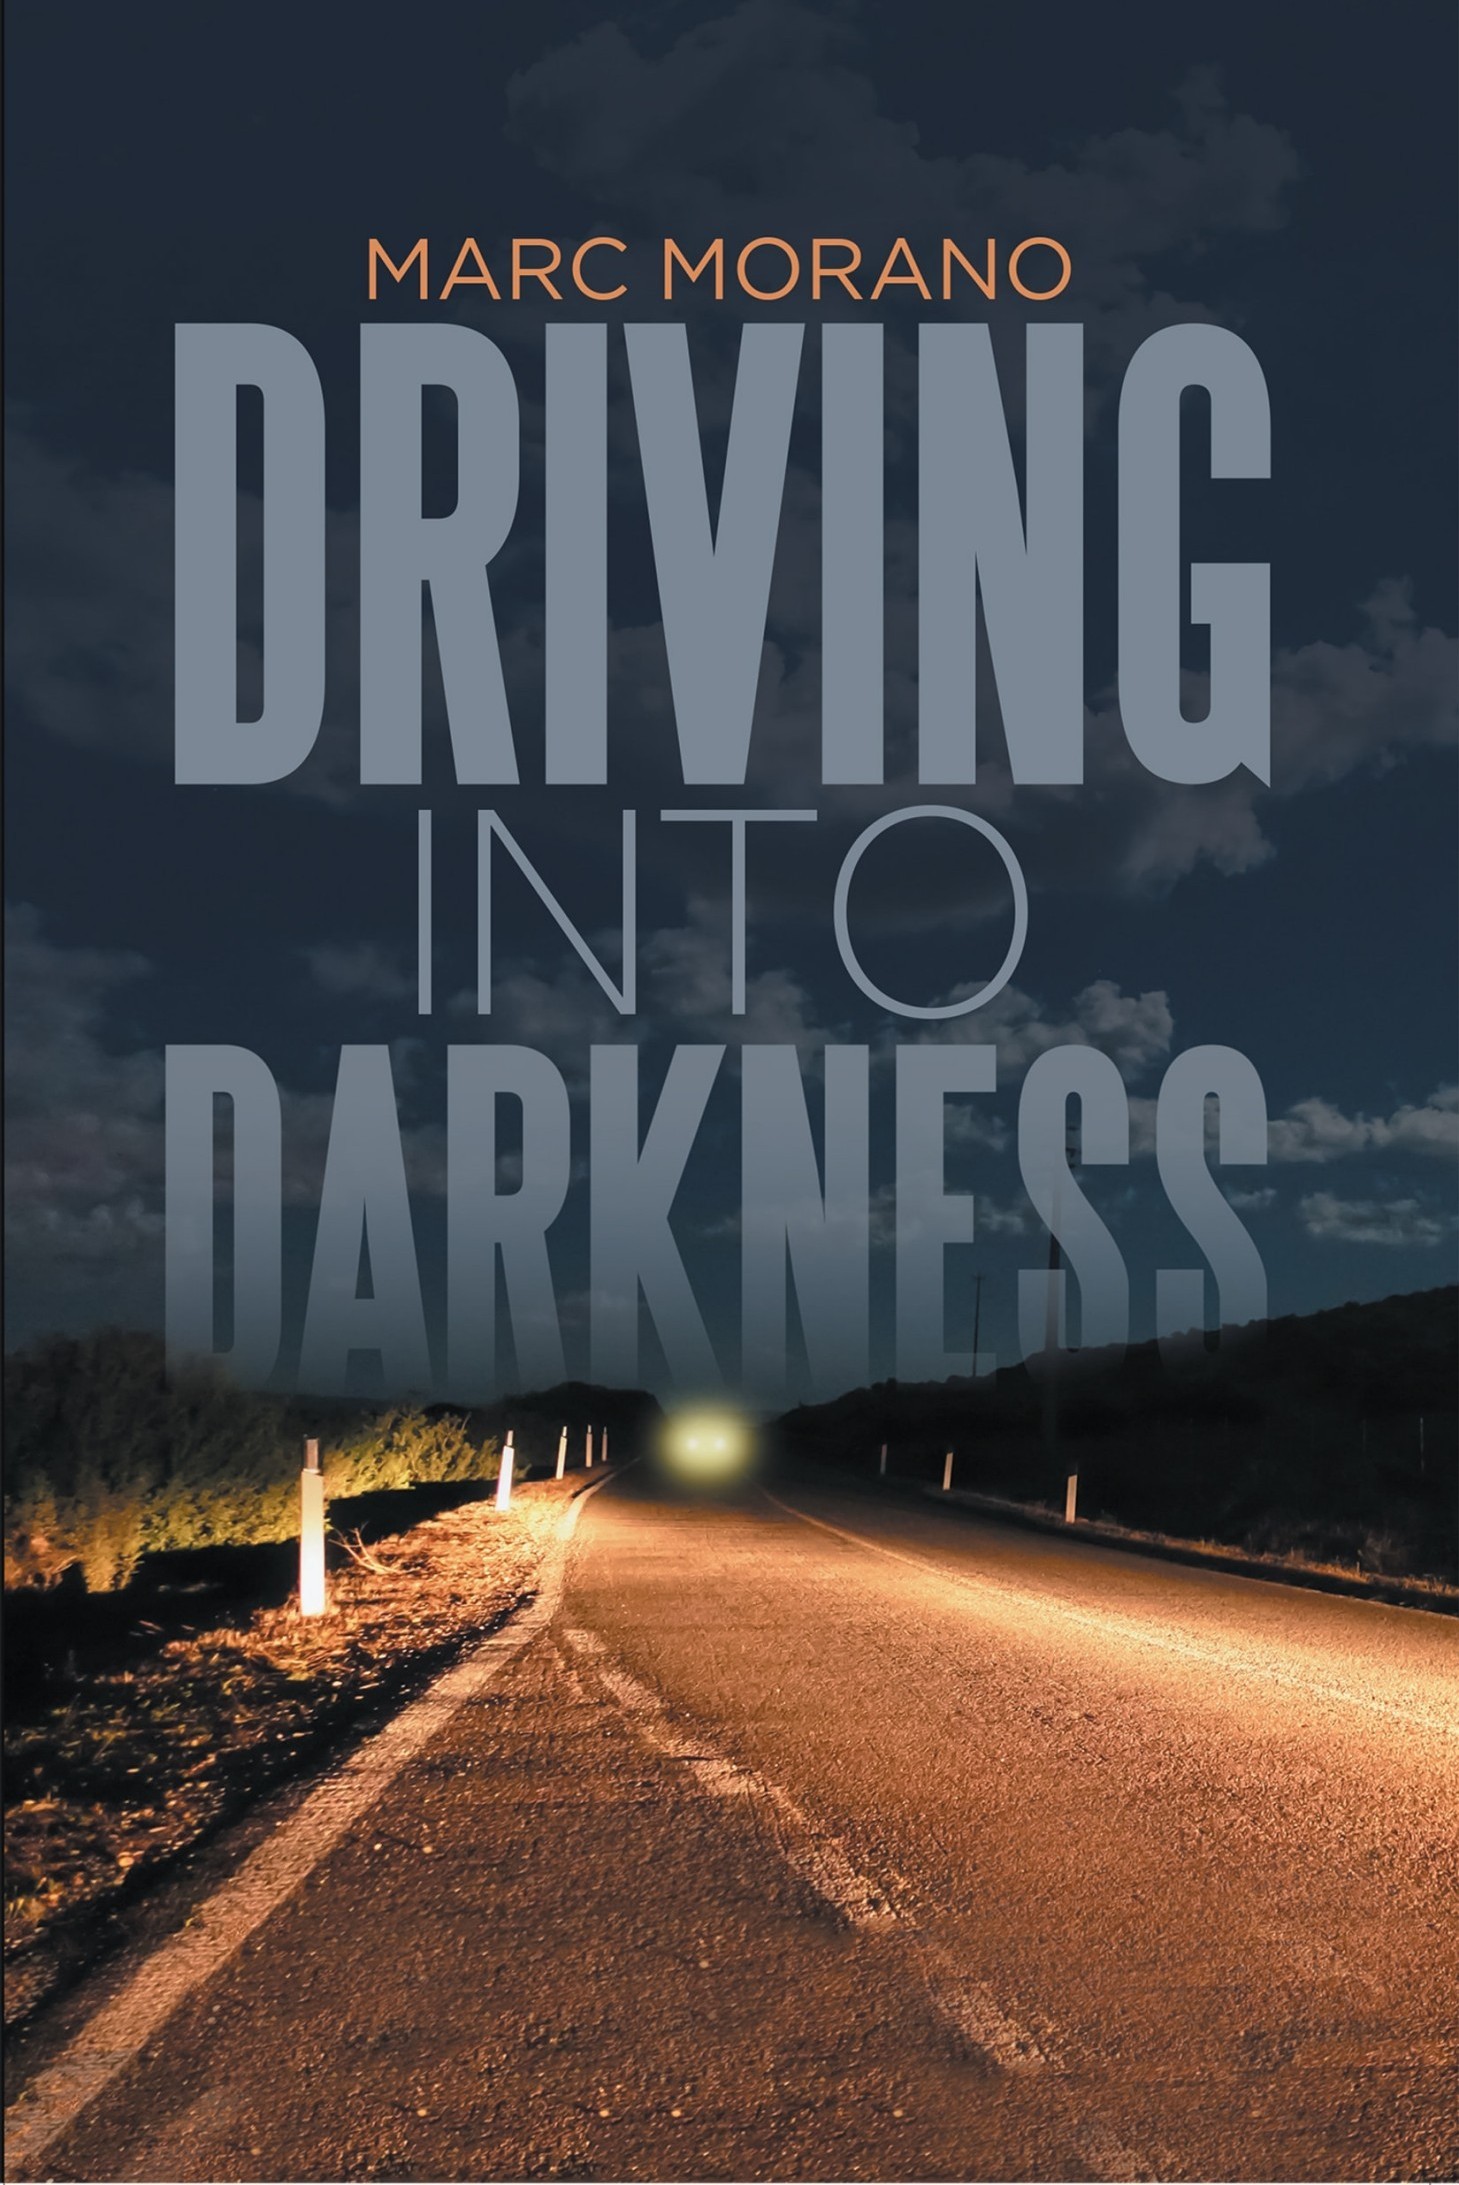 Driving Into Darkness